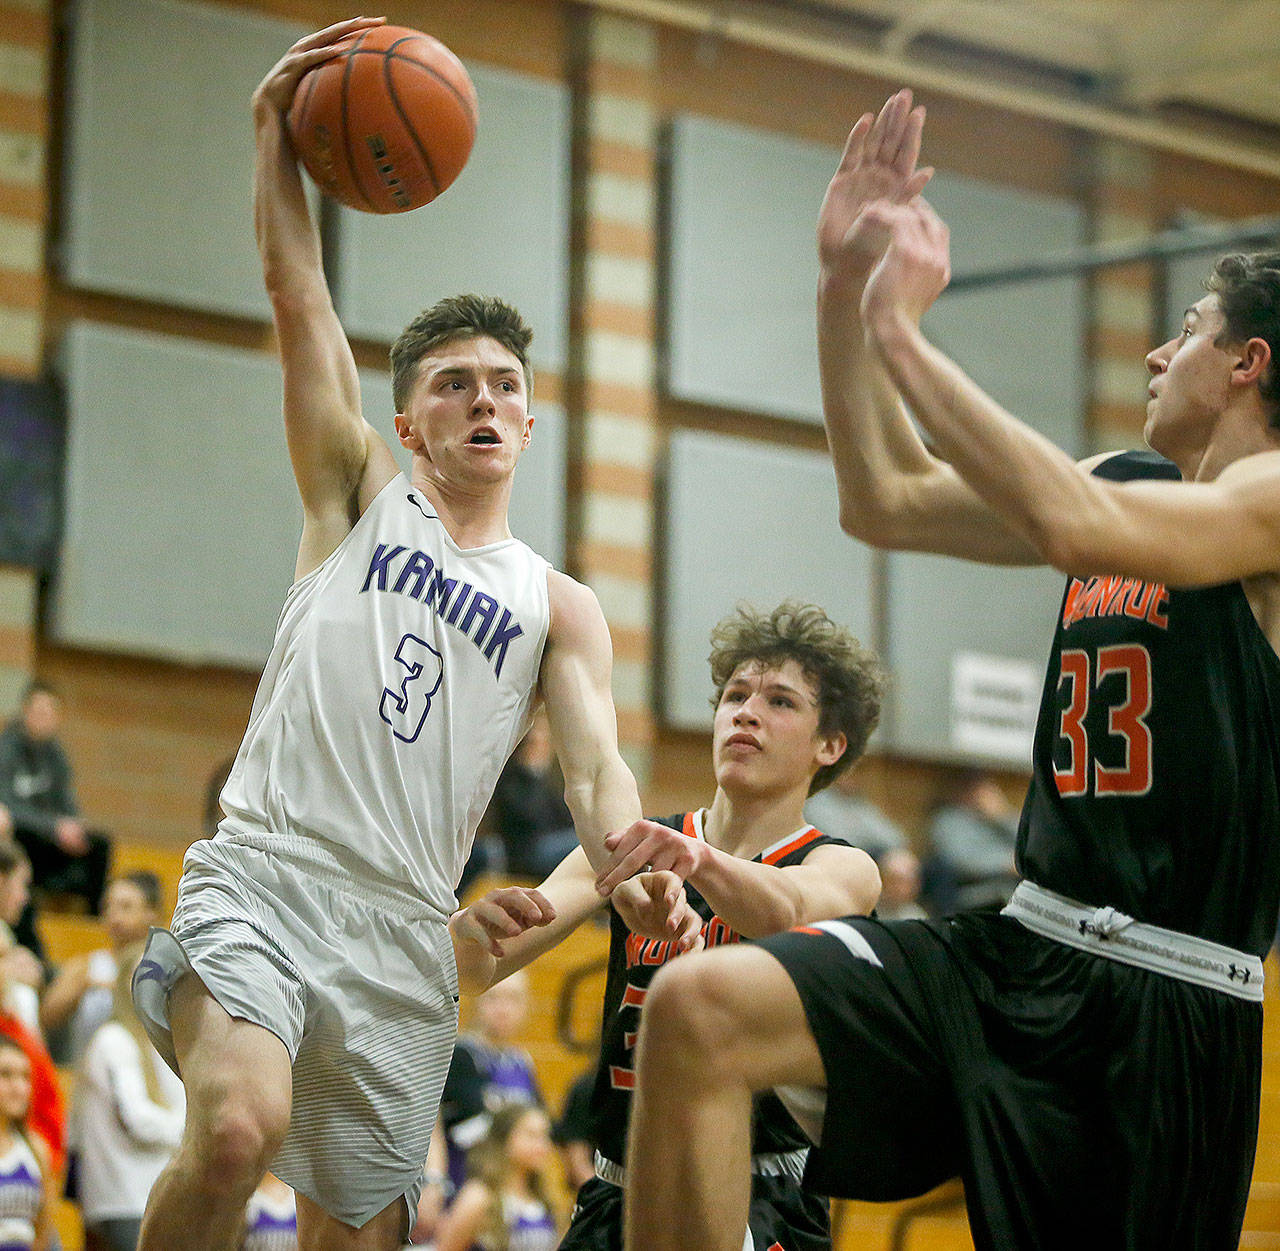 Kamiak’s Carson Tuttle (3) makes a quick pass during a game against Monroe on Jan. 2 at Kamiak High School in Mukilteo. Tuttle set the Kamiak school scoring record earlier this season with 52 points in a tournament in Southern California. (Ian Terry / The Herald)